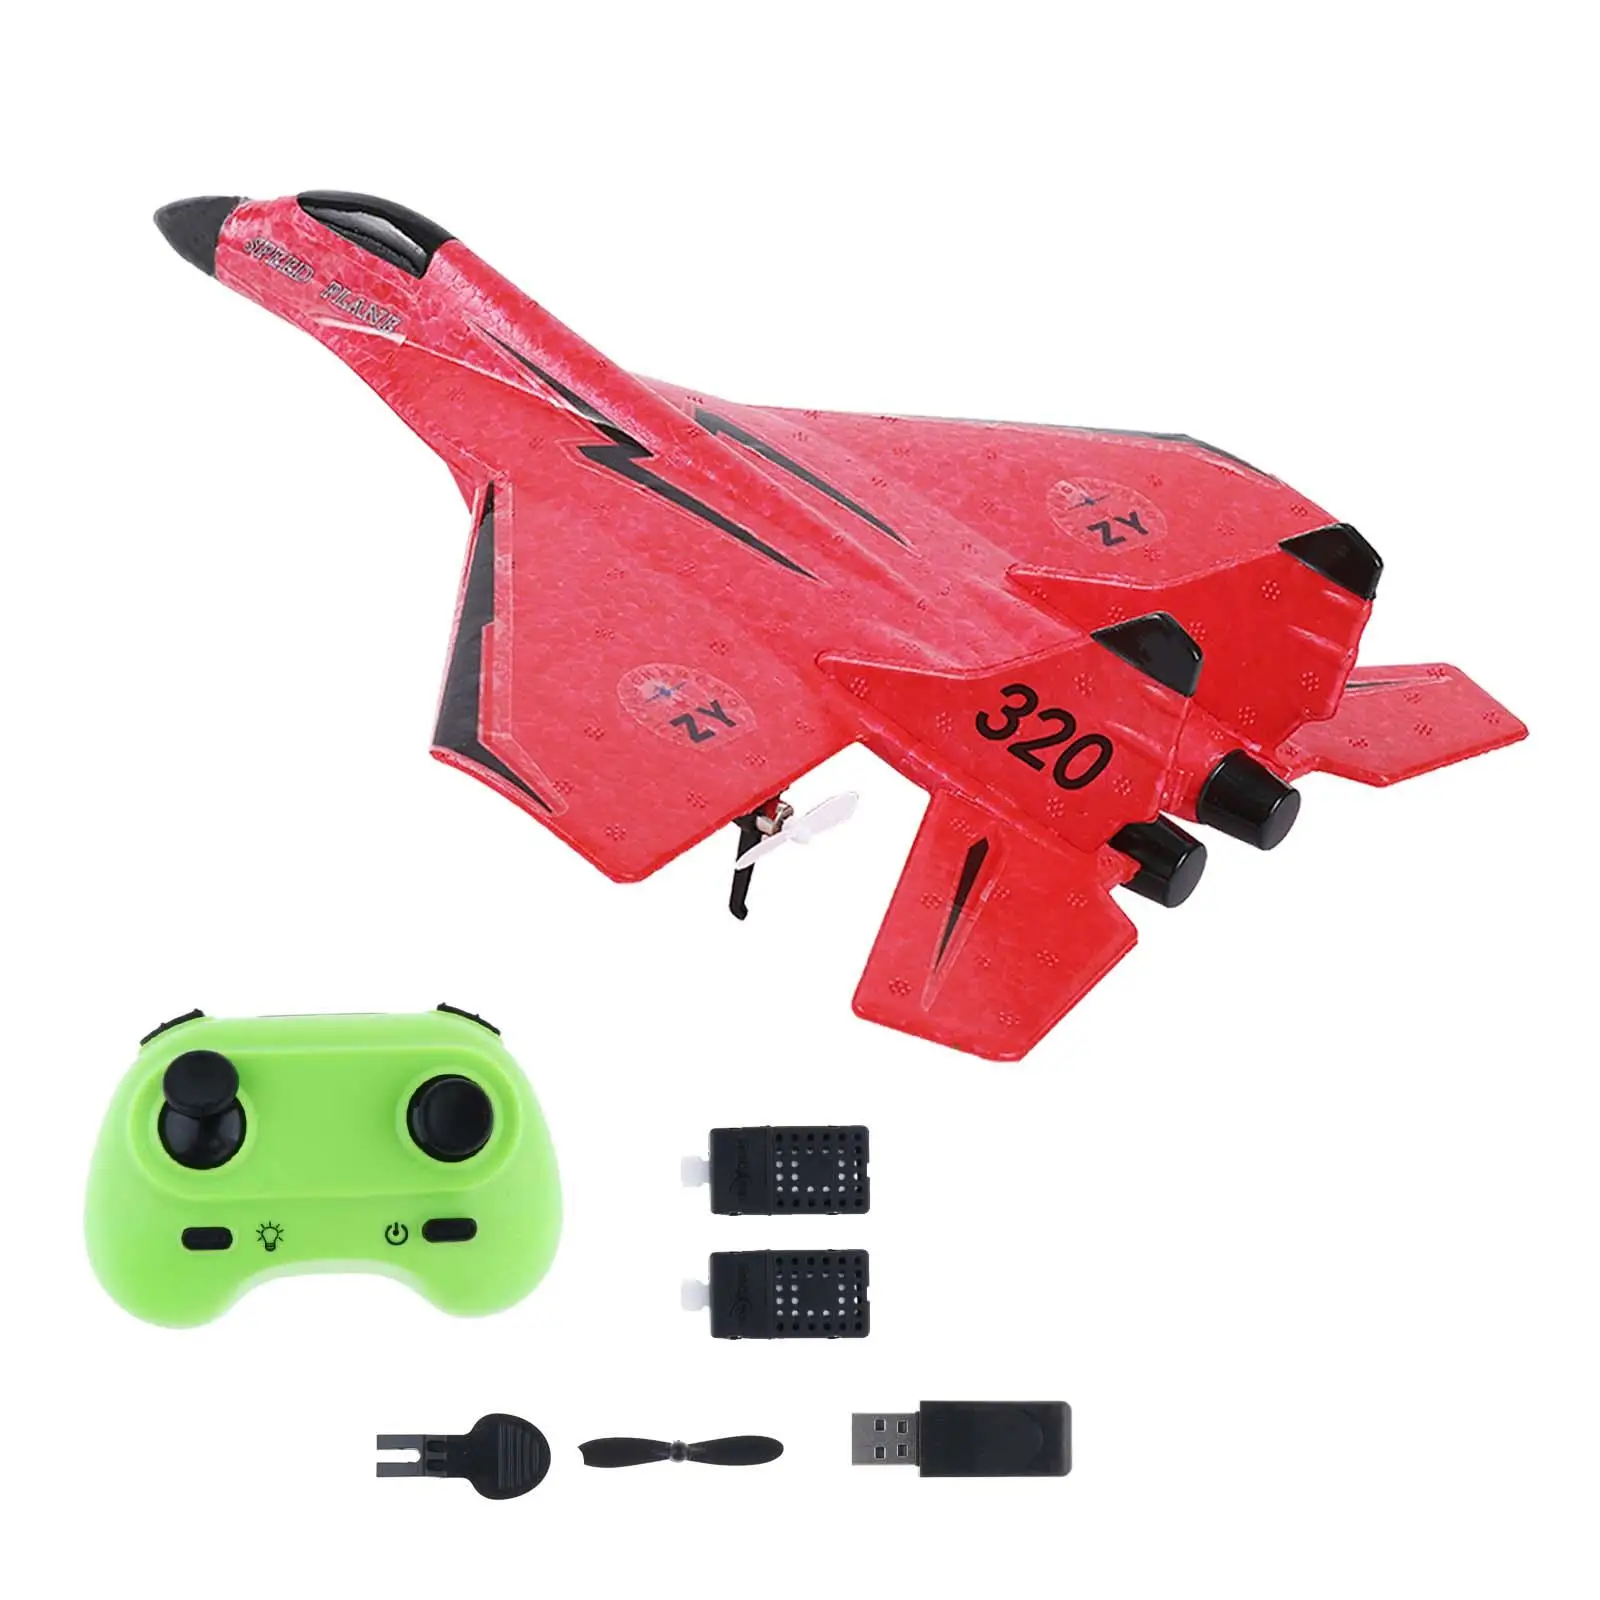 RC Fixed Wing Plane Gift with LED Cool Light Portable Outdoor Toys 2.4G 2 Channel RC Glider for Adults Kids Boys Girls Beginner